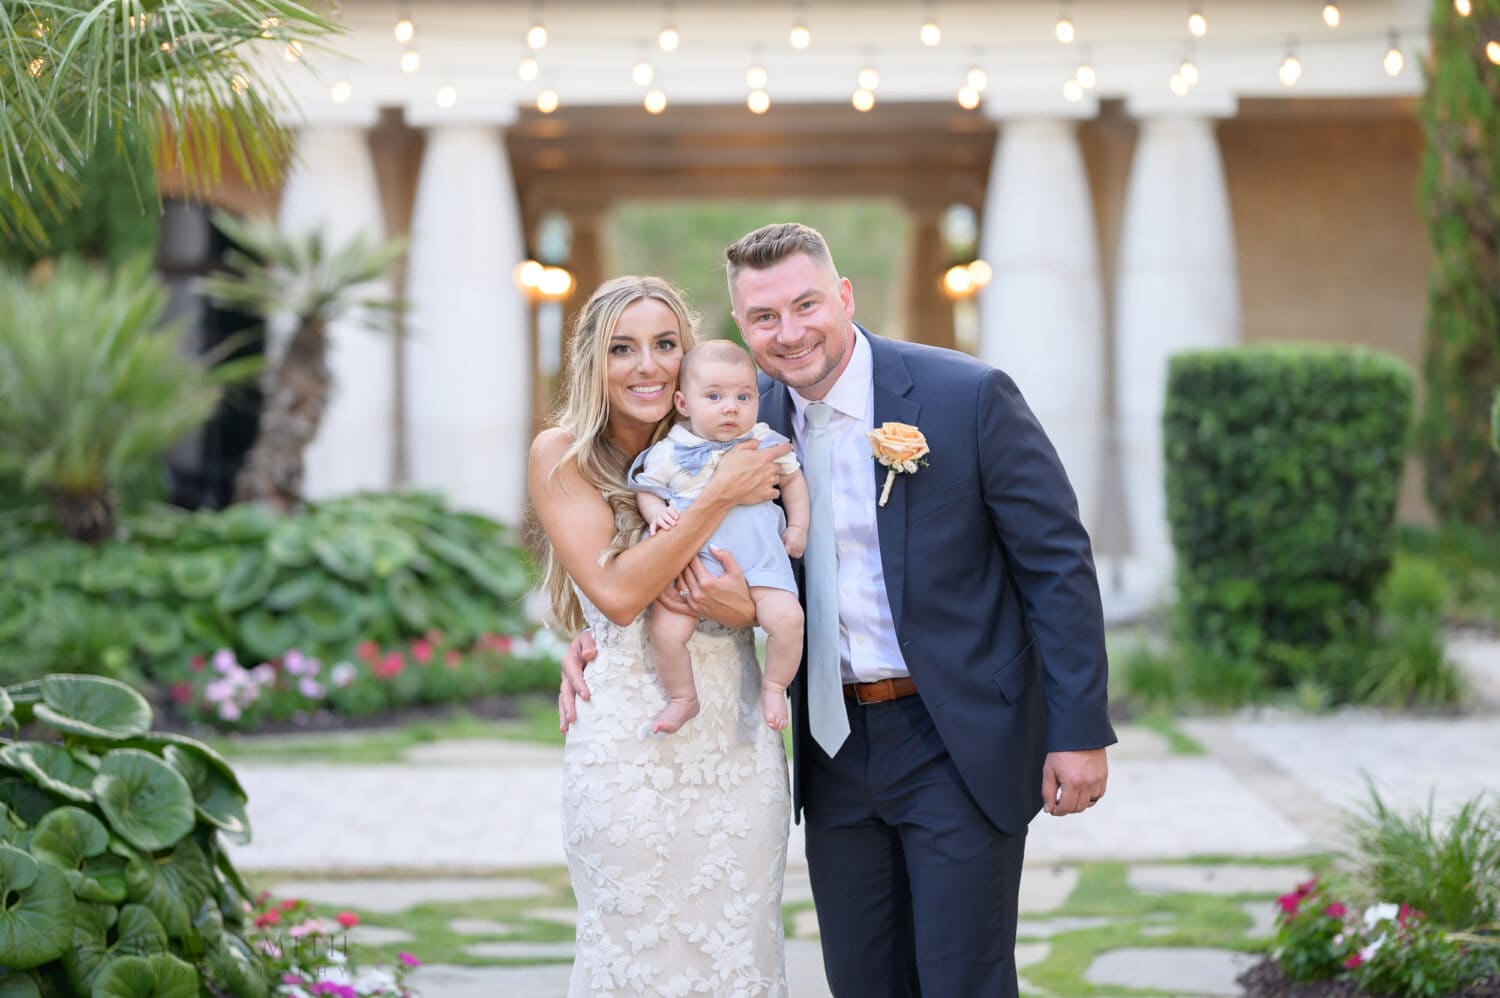 Bride and groom holding baby nephew - 21 Main Events